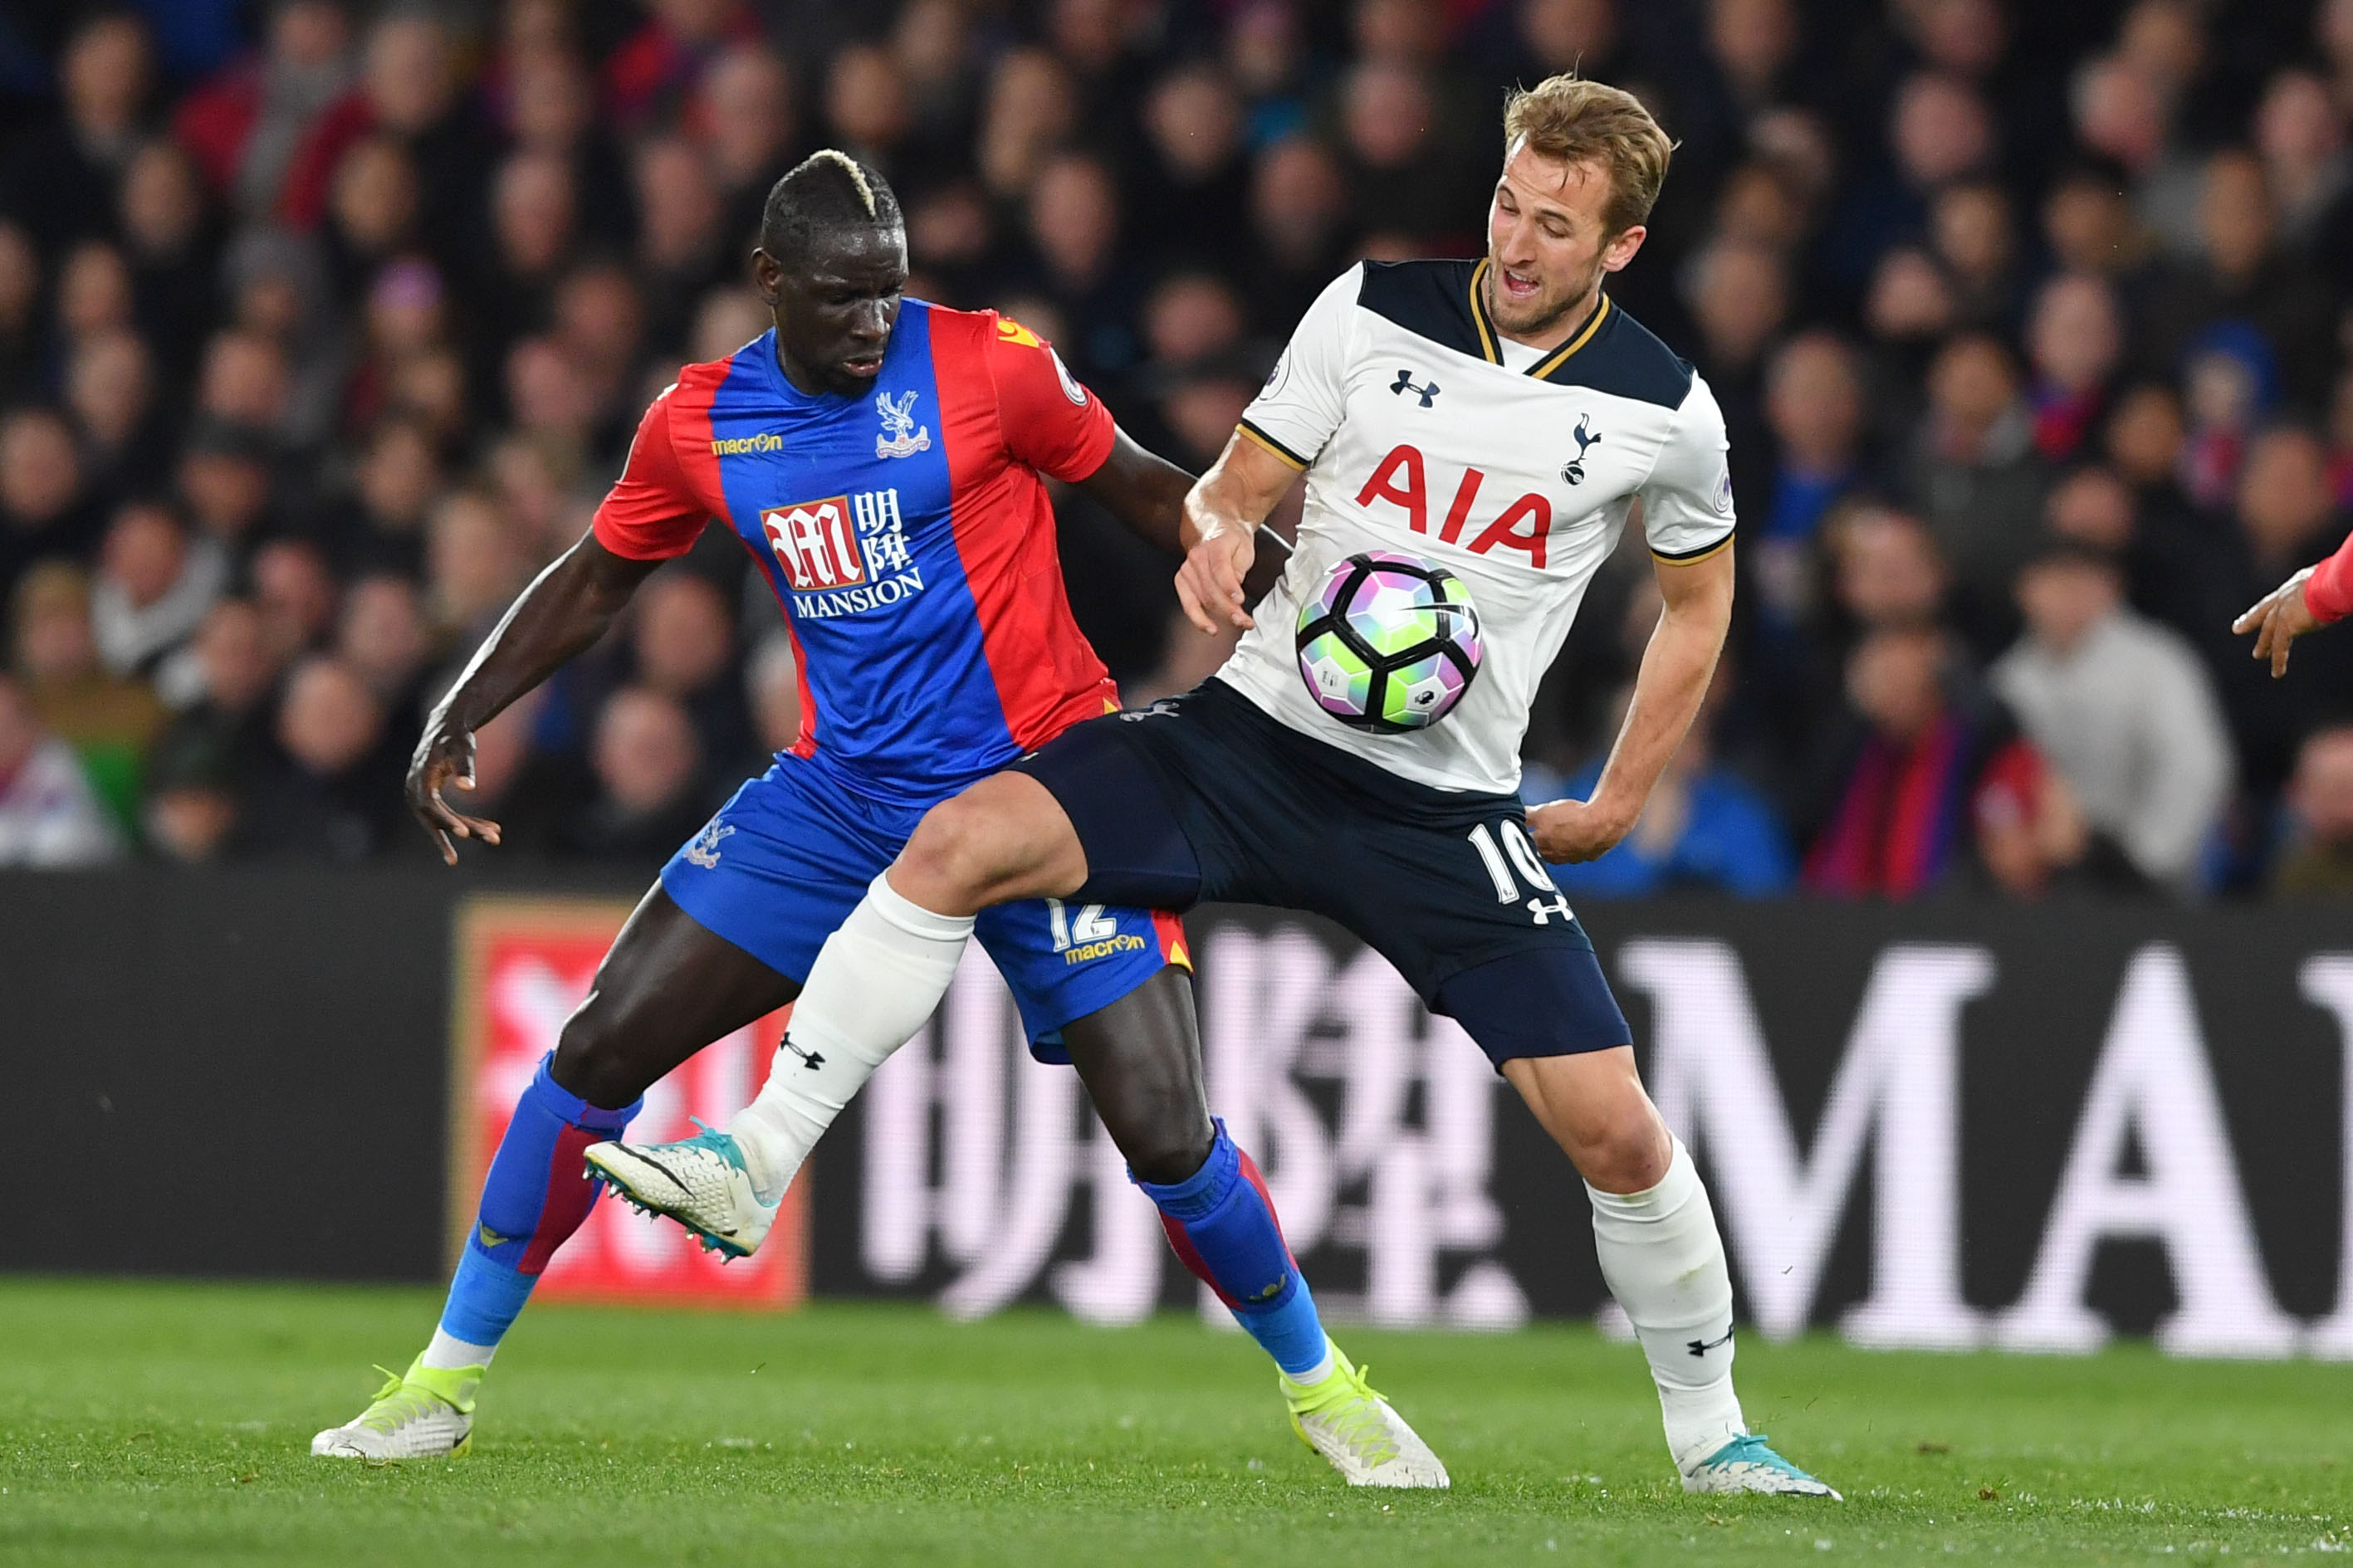 Crystal Palace's French midfielder Mamadou Sakho (L) vies with Tottenham Hotspur's English striker Harry Kane during the English Premier League football match between Crystal Palace and Tottenham Hotspur at Selhurst Park in south London on April 26, 2017. / AFP PHOTO / Ben STANSALL / RESTRICTED TO EDITORIAL USE. No use with unauthorized audio, video, data, fixture lists, club/league logos or 'live' services. Online in-match use limited to 75 images, no video emulation. No use in betting, games or single club/league/player publications.  /         (Photo credit should read BEN STANSALL/AFP/Getty Images)